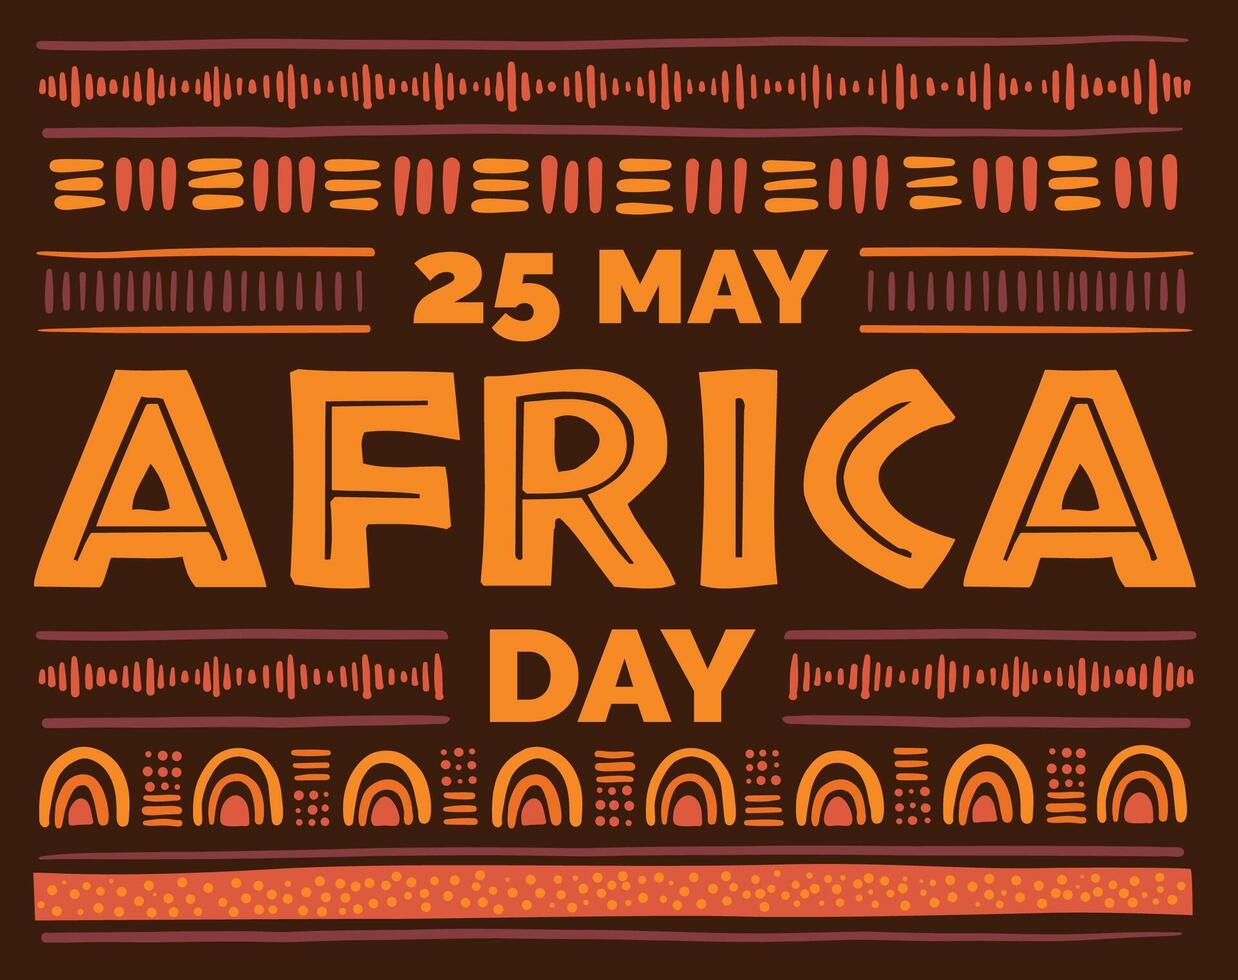 Africa Day concept. Stylized African Pattern on dark background. Ethnic and Tribal Motifs. Hand drawn. Horizontal stripes. For banner, poster, flyer. Vector illustration